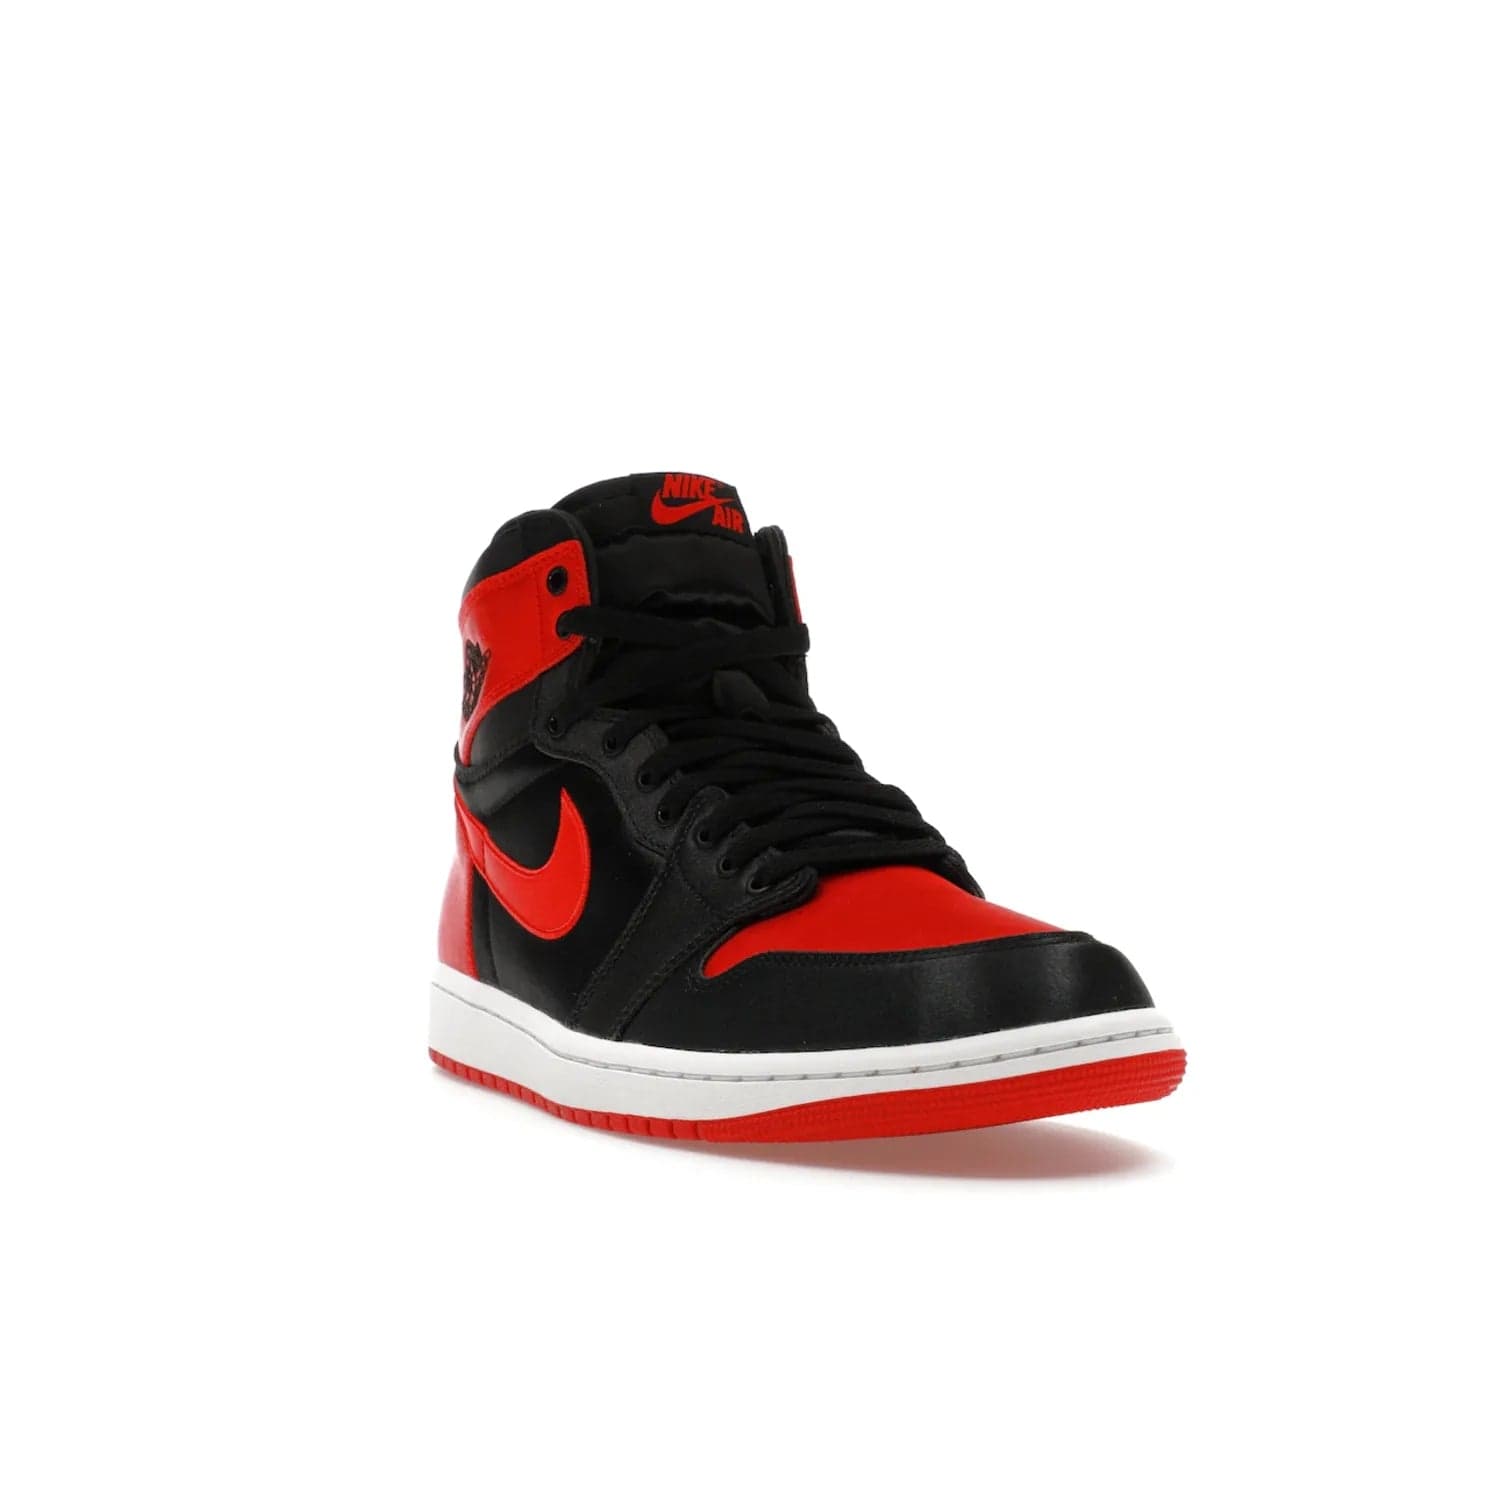 Jordan 1 Retro High OG Satin Bred (Women's) - Image 7 - Only at www.BallersClubKickz.com - Introducing the Jordan 1 Retro High OG Satin Bred (Women's). Luxe satin finish, contrasting hues & classic accents. Trending sneakers symbolizing timelessness & heritage. Make a bold statement with this iconic shoe. Available October 4, 2023.